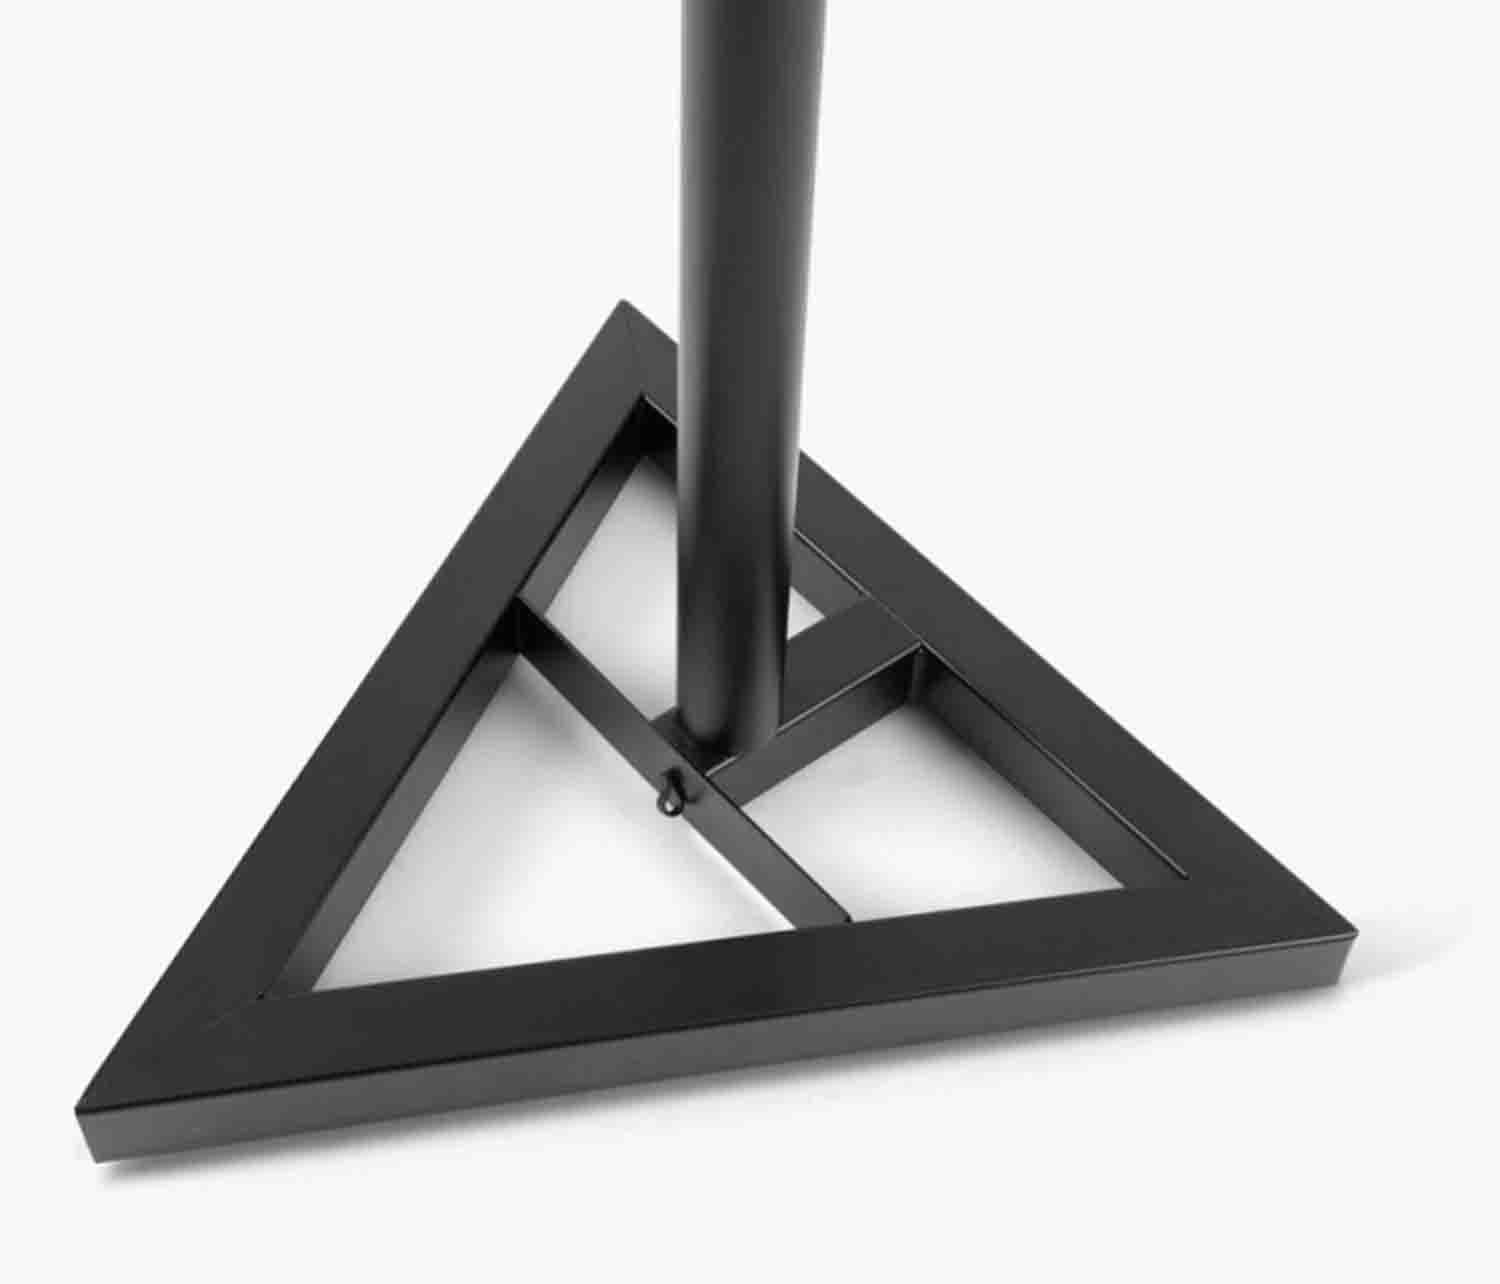 On Stage SMS6000-P Studio Monitor Stands (Pair) - Hollywood DJ